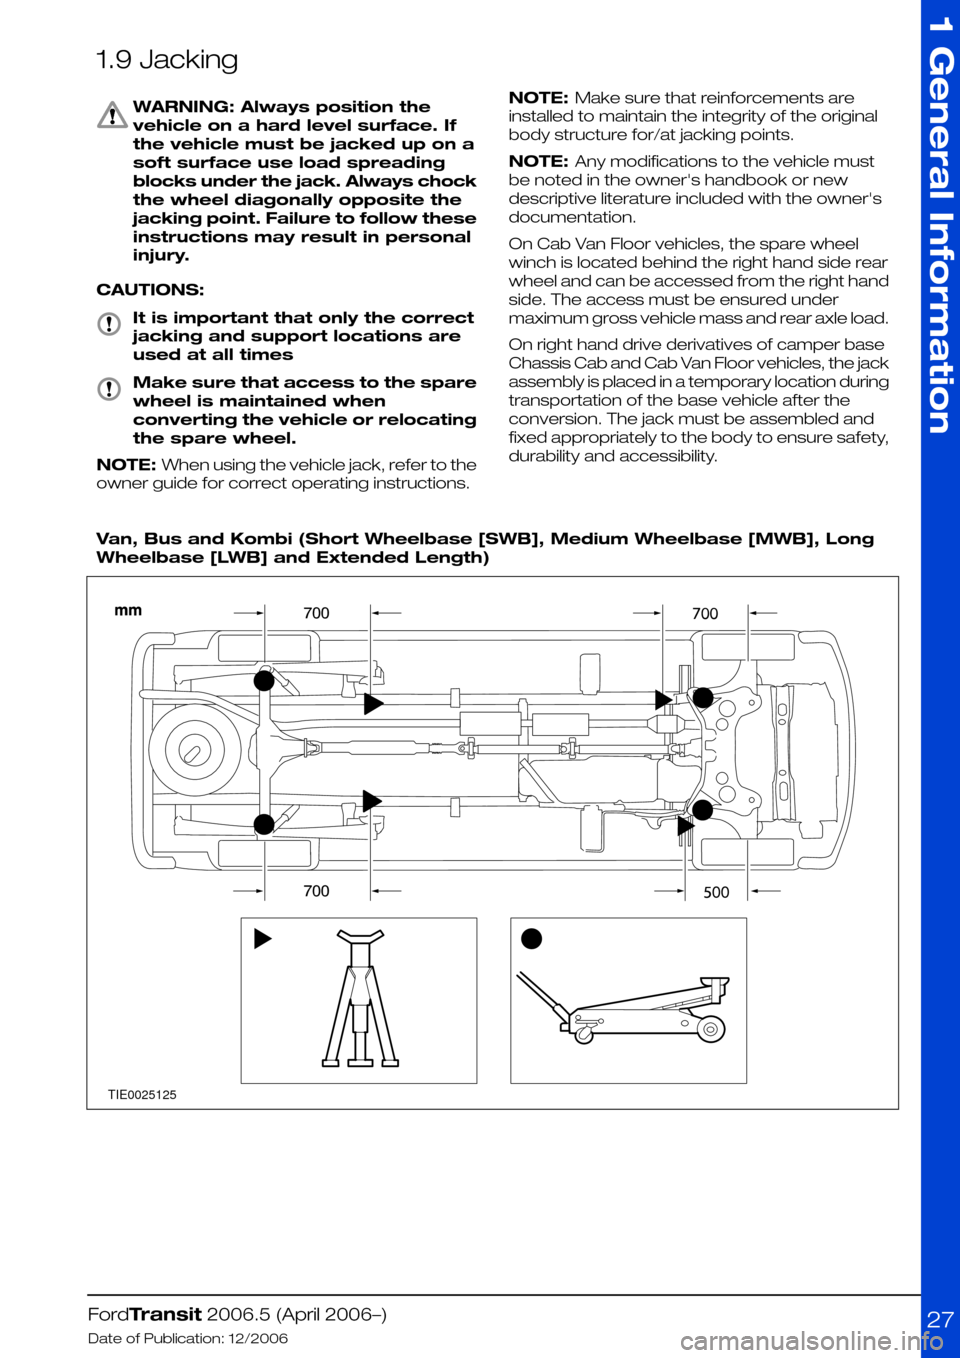 FORD TRANSIT 2006 7.G Body And Equipment Mounting Section Manual 1.9 Jacking
WARNING: Always position the
vehicle on a hard level surface. If
the vehicle must be jacked up on a
soft surface use load spreading
blocks under the jack. Always chock
the wheel diagonally